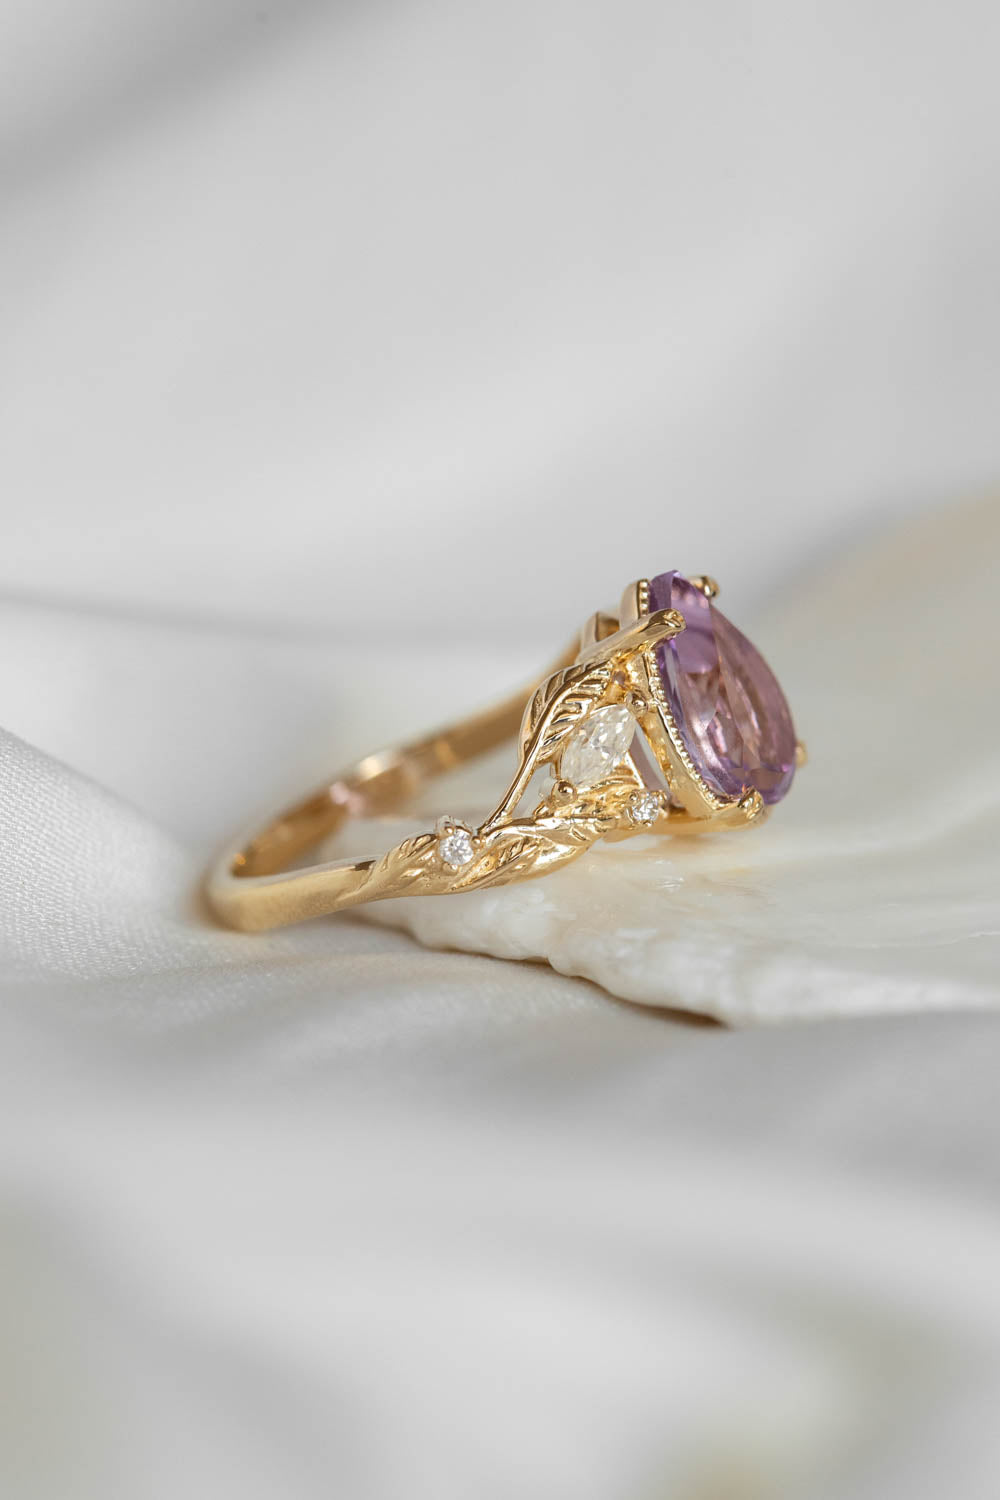 Lavender amethyst nature themed engagement ring, big pear cut gemstone gold ring with diamonds / Patricia - Eden Garden Jewelry™